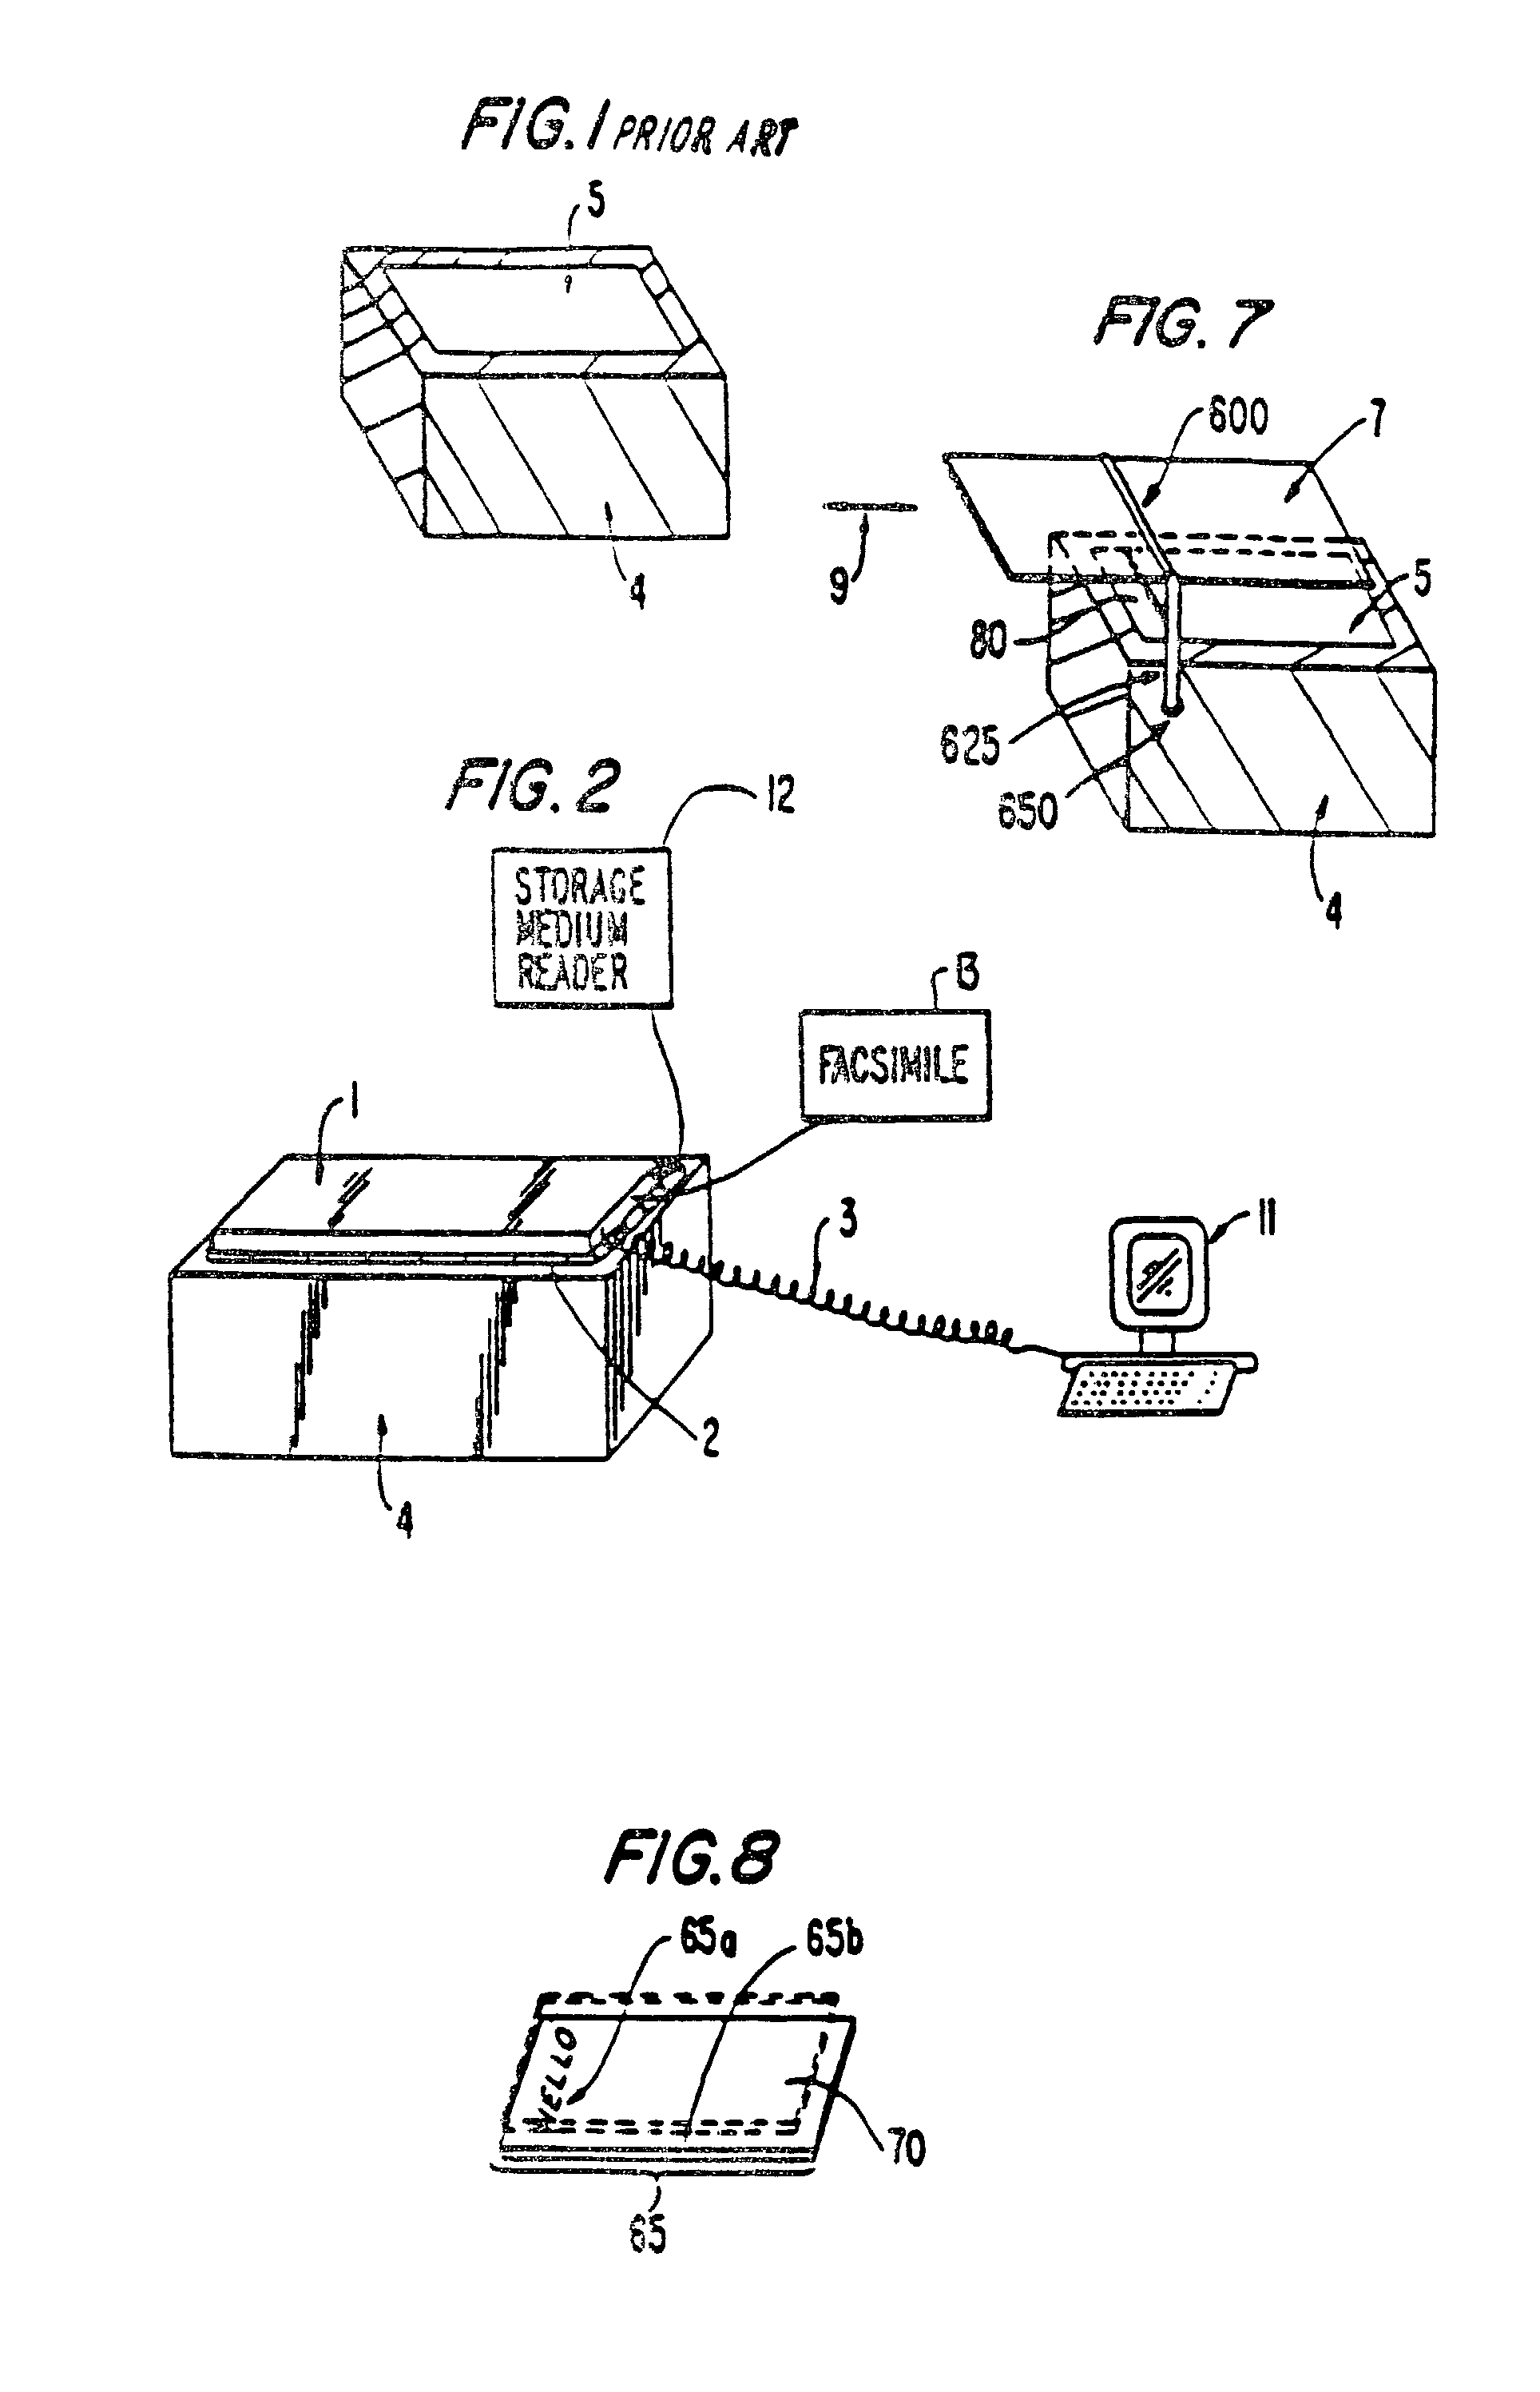 Method and apparatus for linking designated portions of a received document image with an electronic address